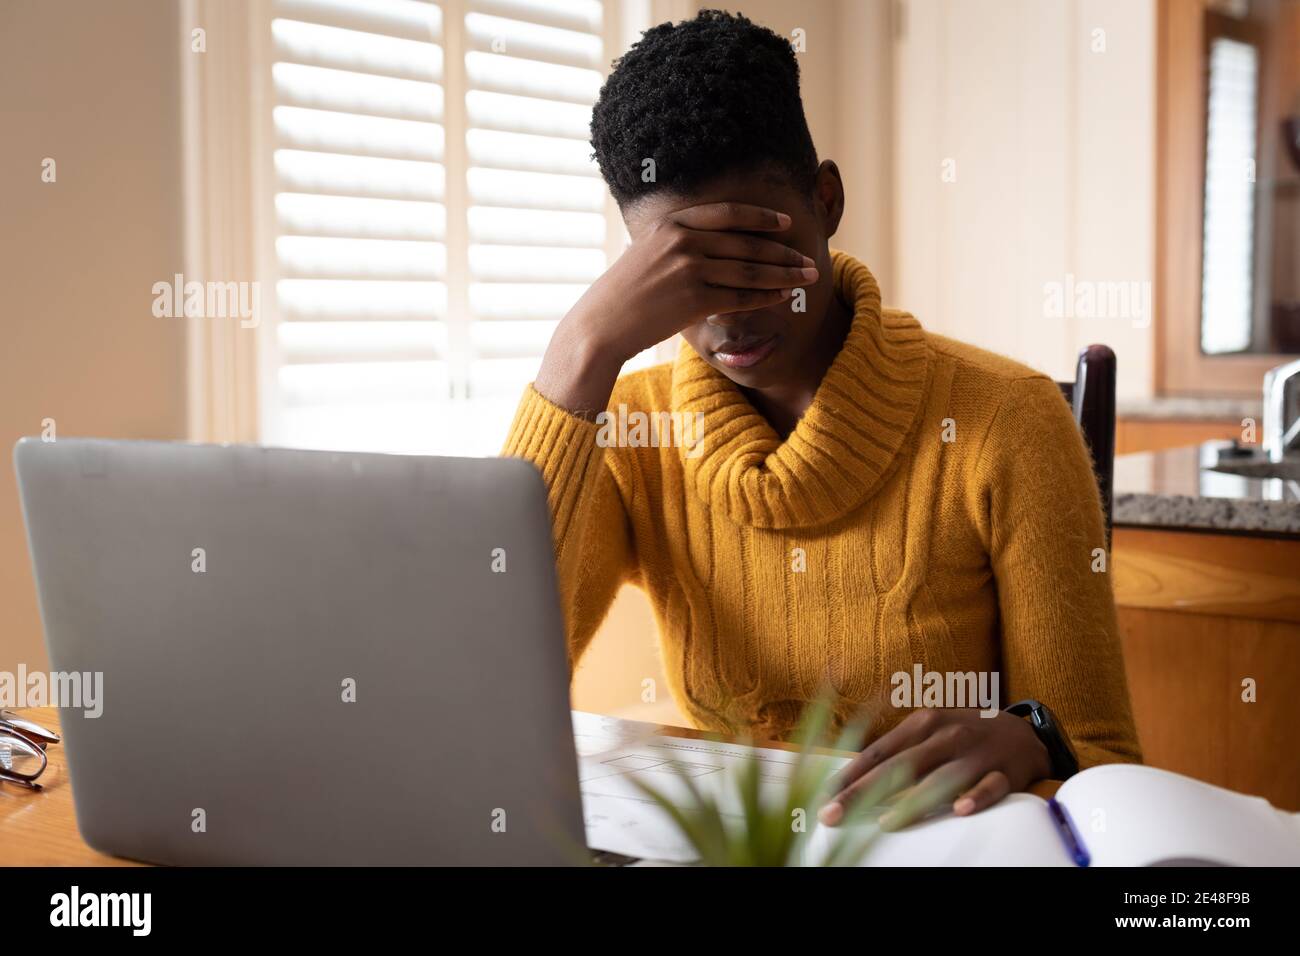 African american woman using laptop rubbing her eyes in kitchen Stock Photo